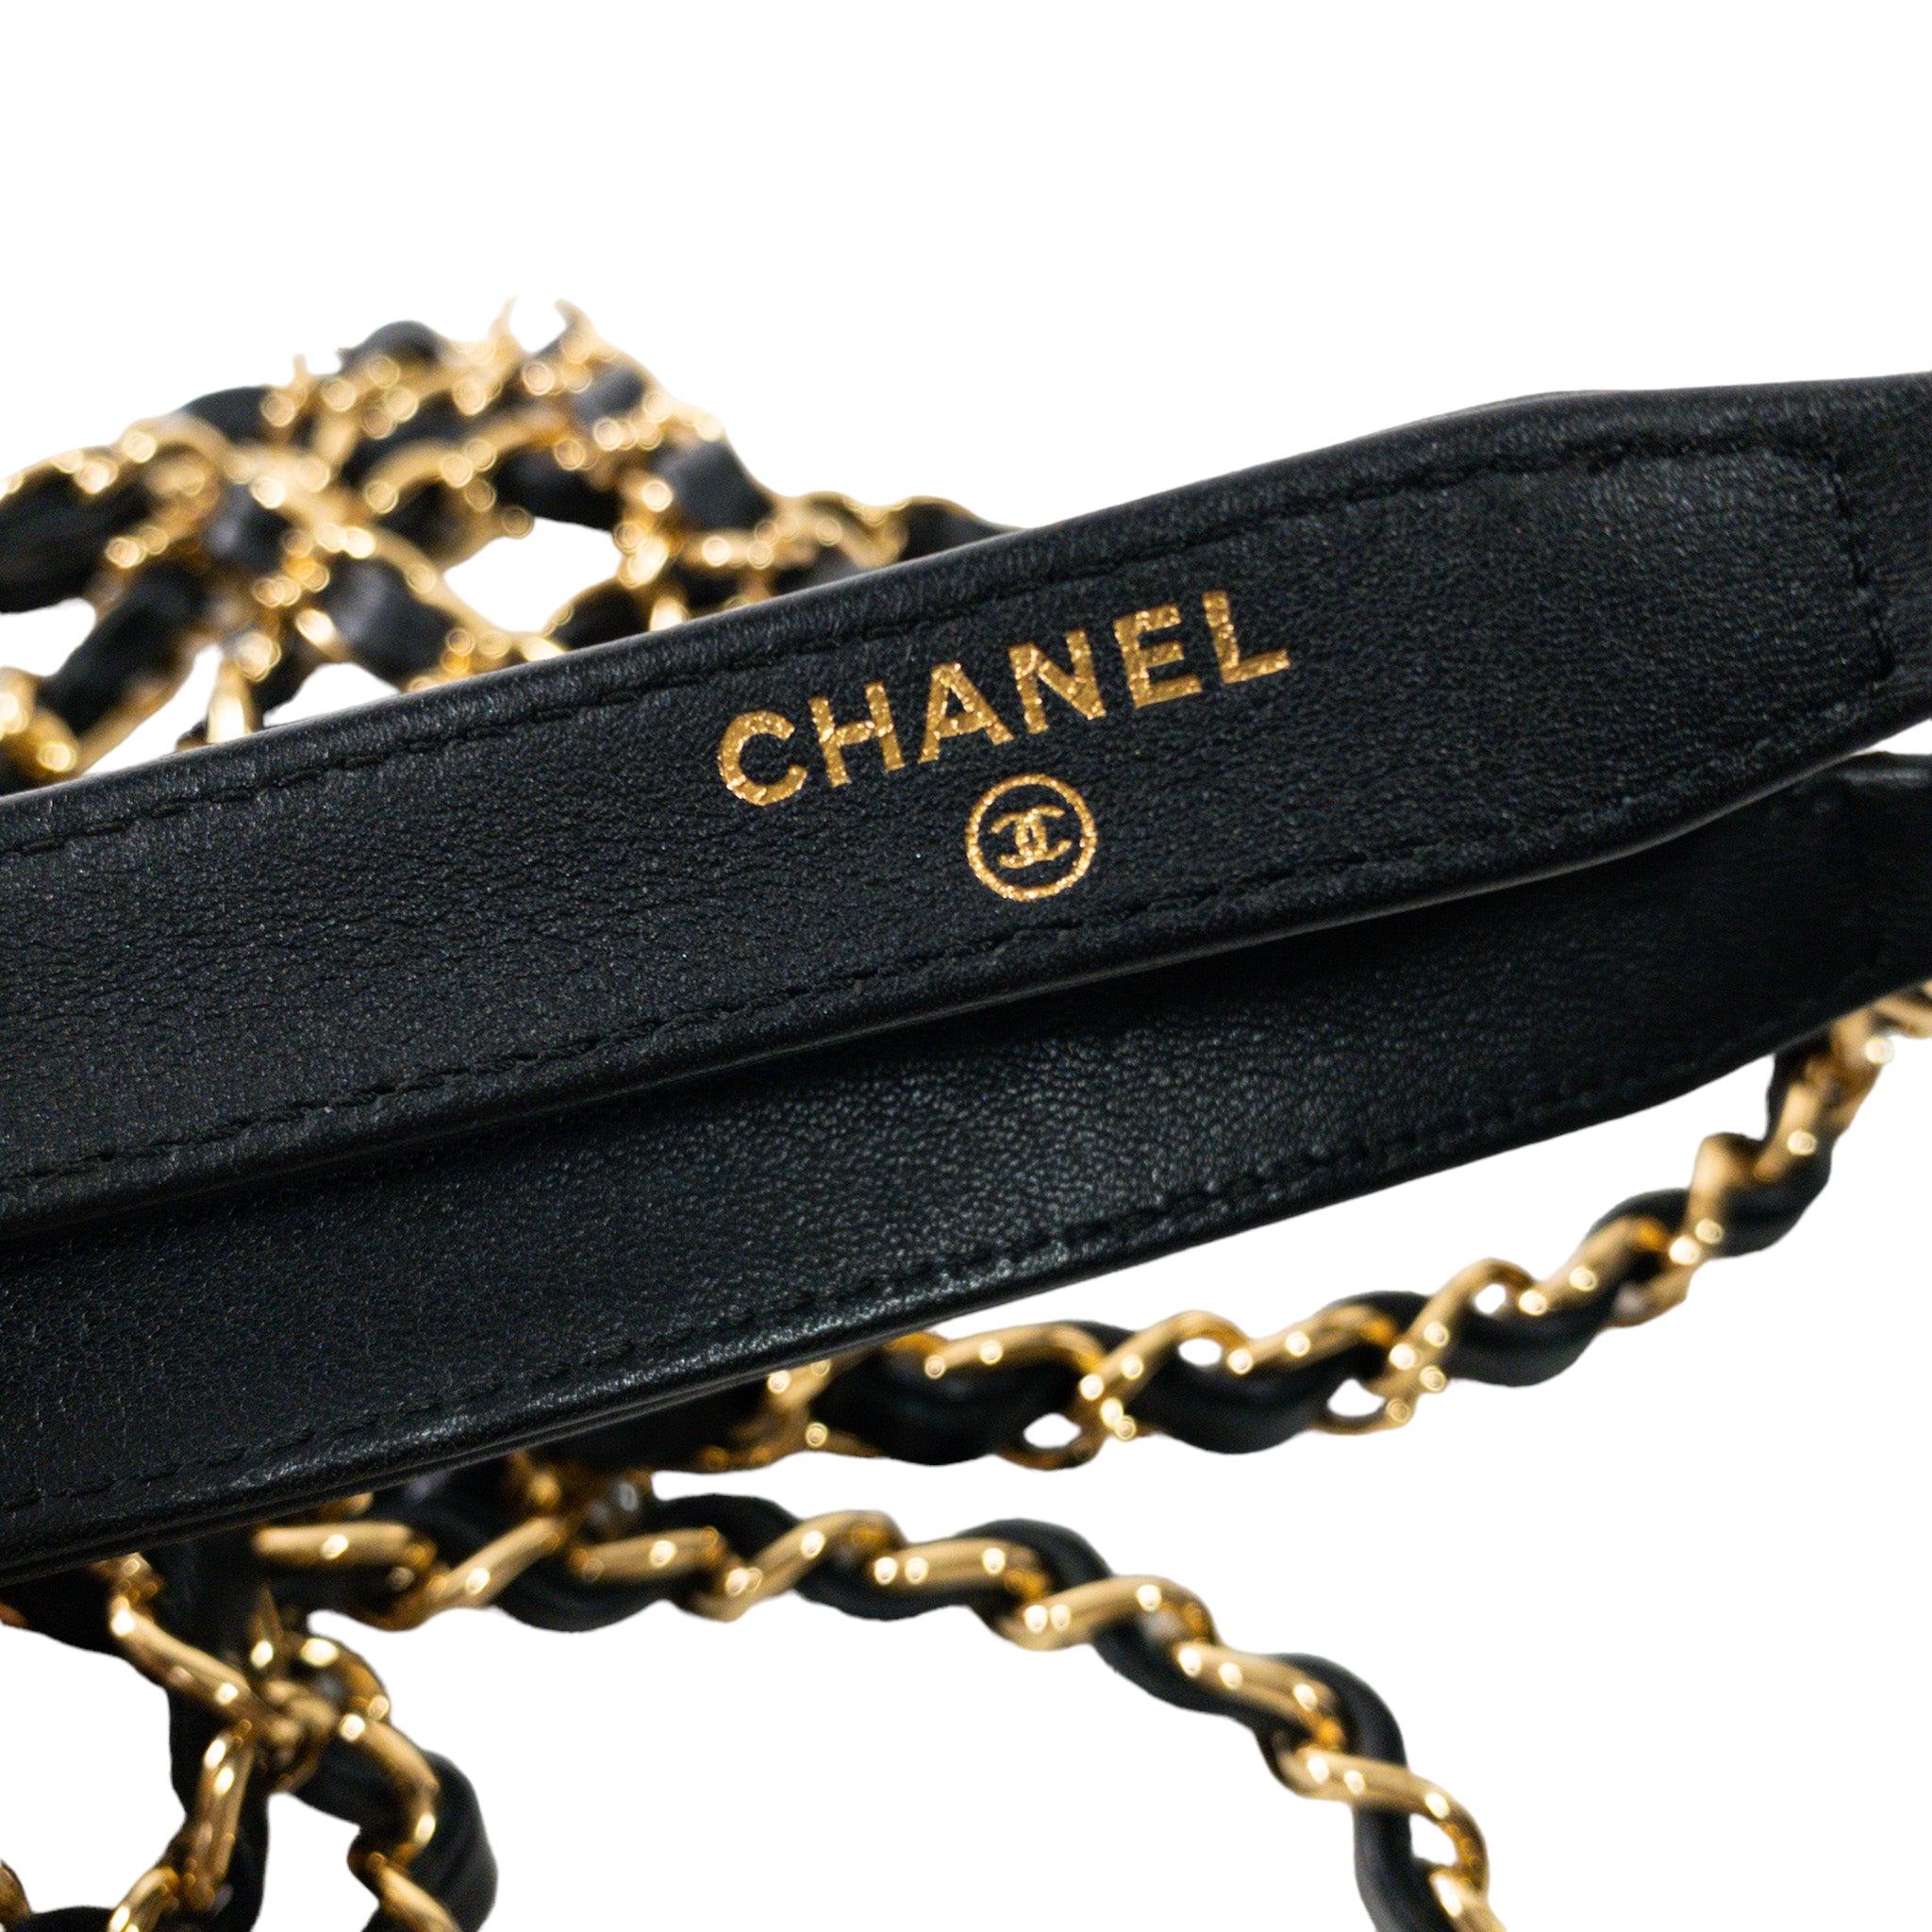 Chanel Limited Edition Basketball with Chain Harness, 2019 In Excellent Condition For Sale In Miami Beach, FL